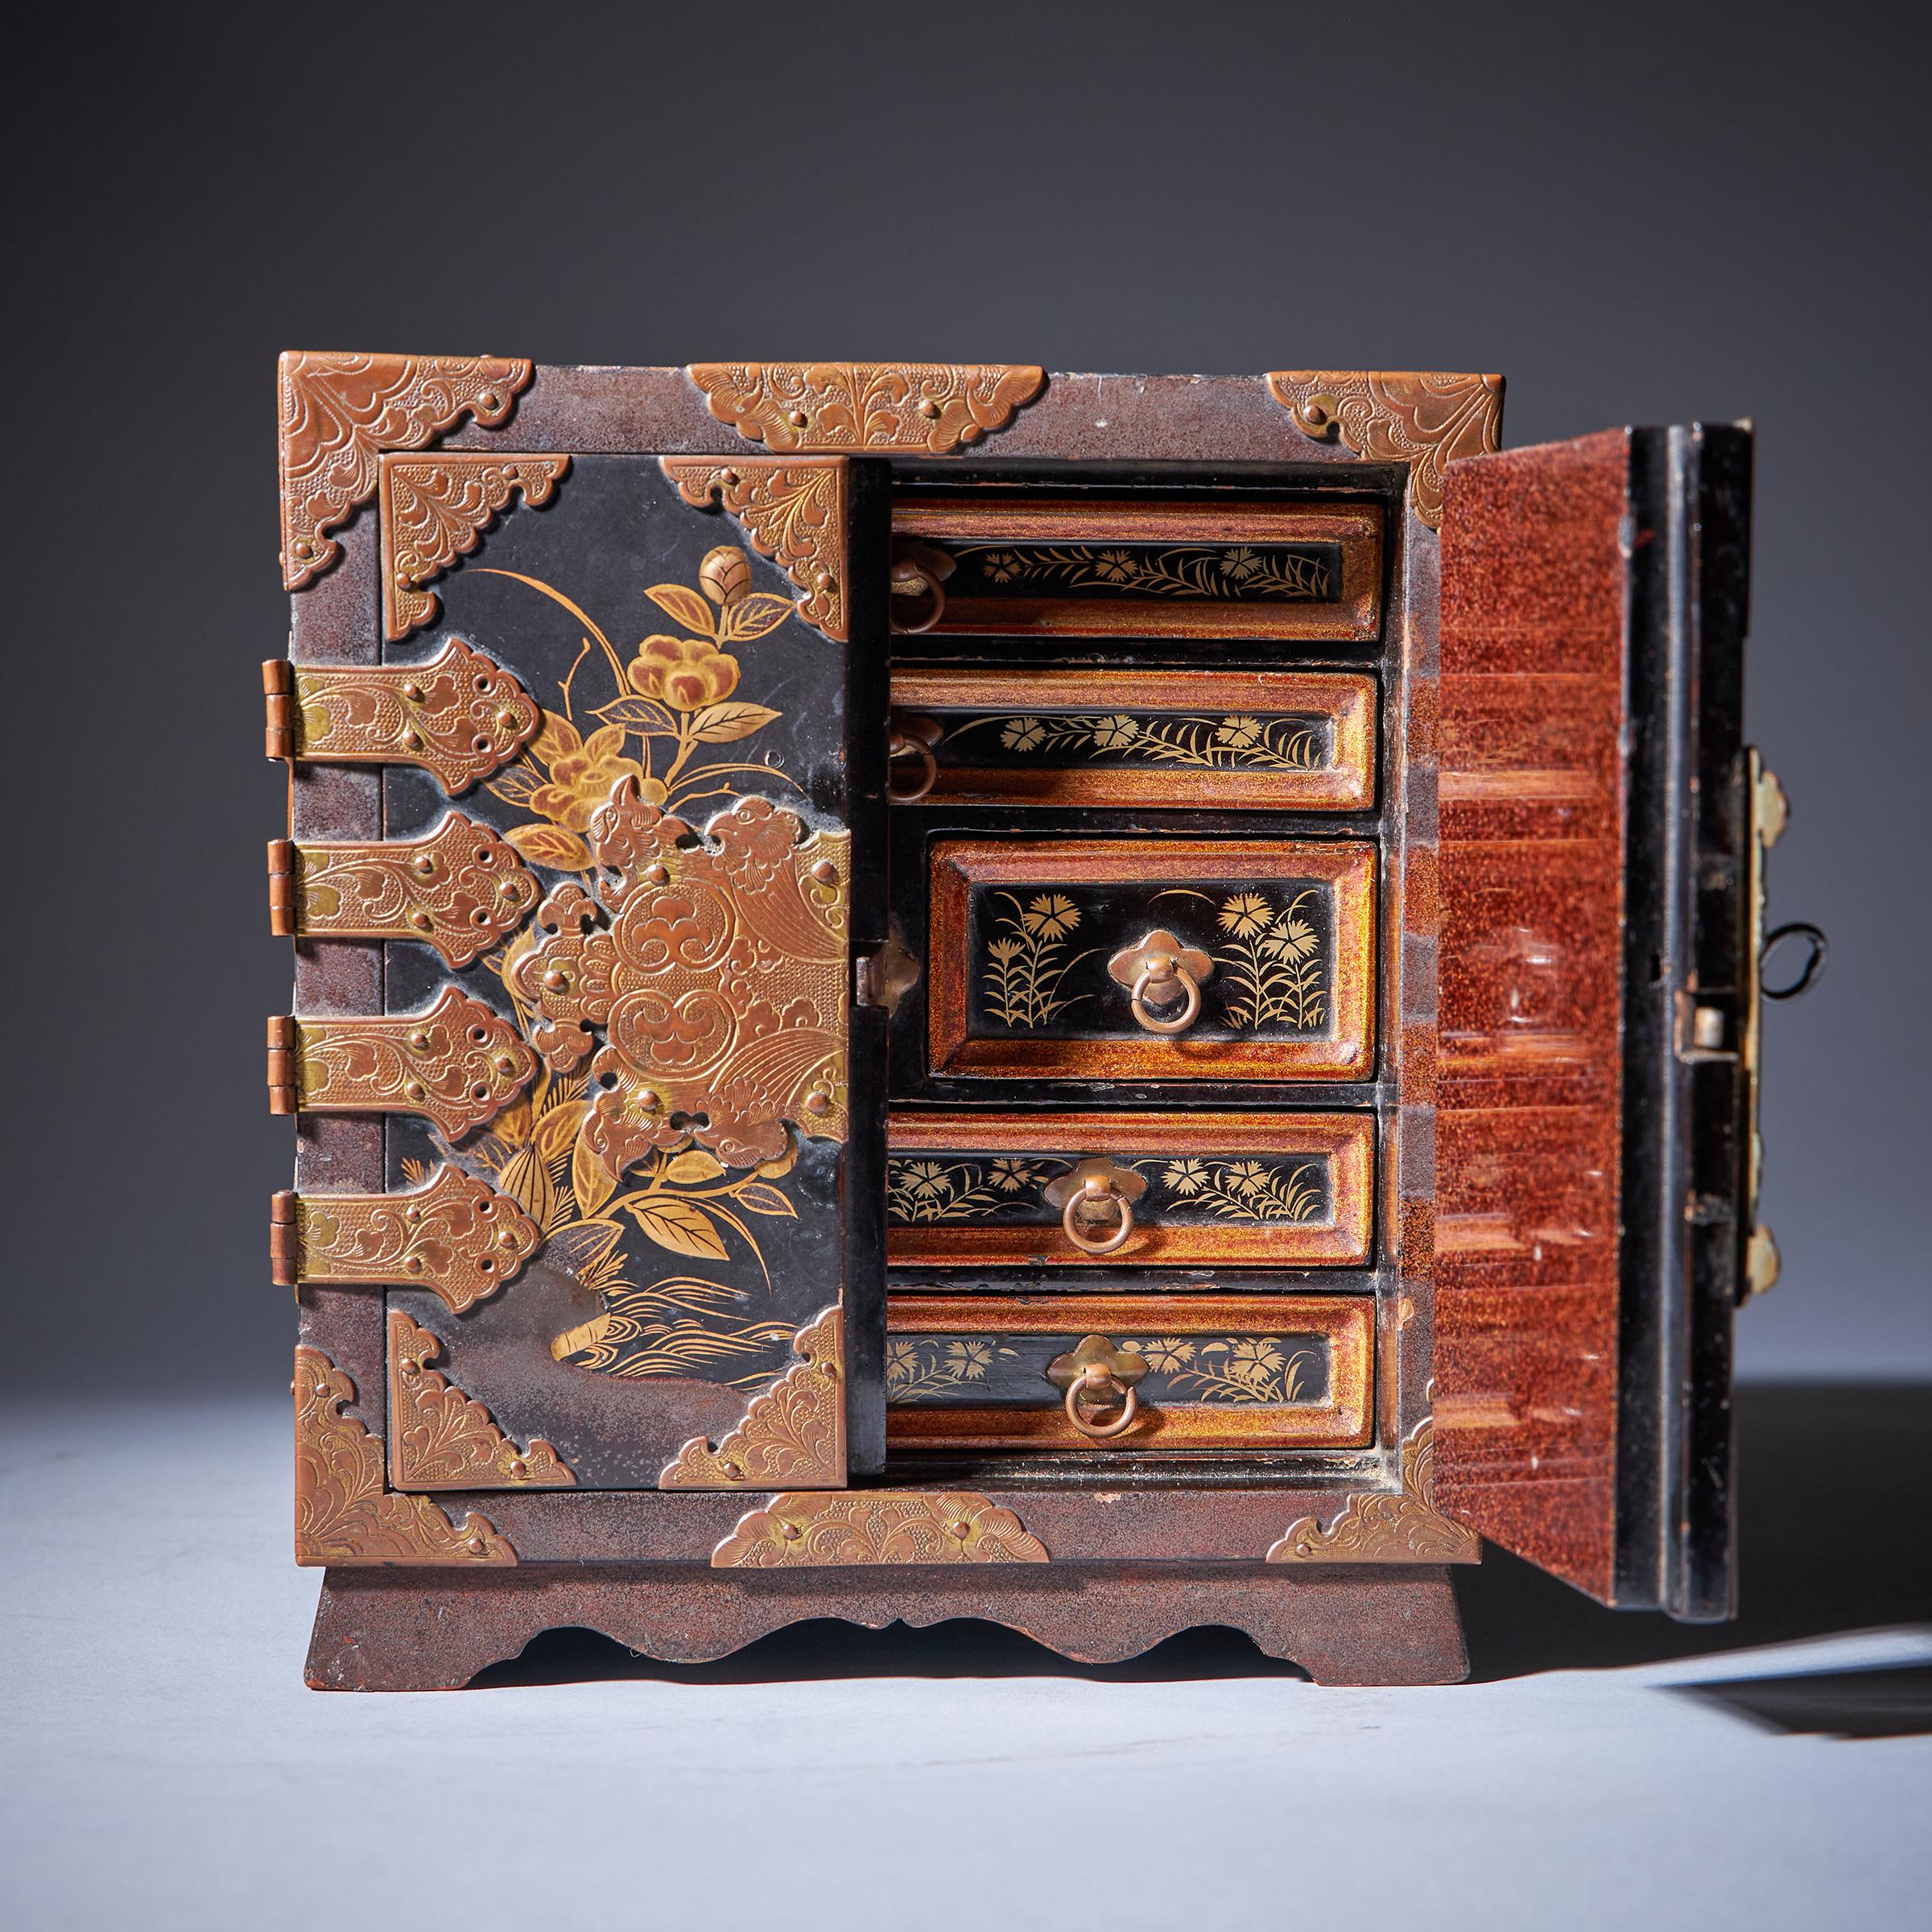 Important Early Edo Period 17th Century Miniature Japanese Lacquer Cabinet-15